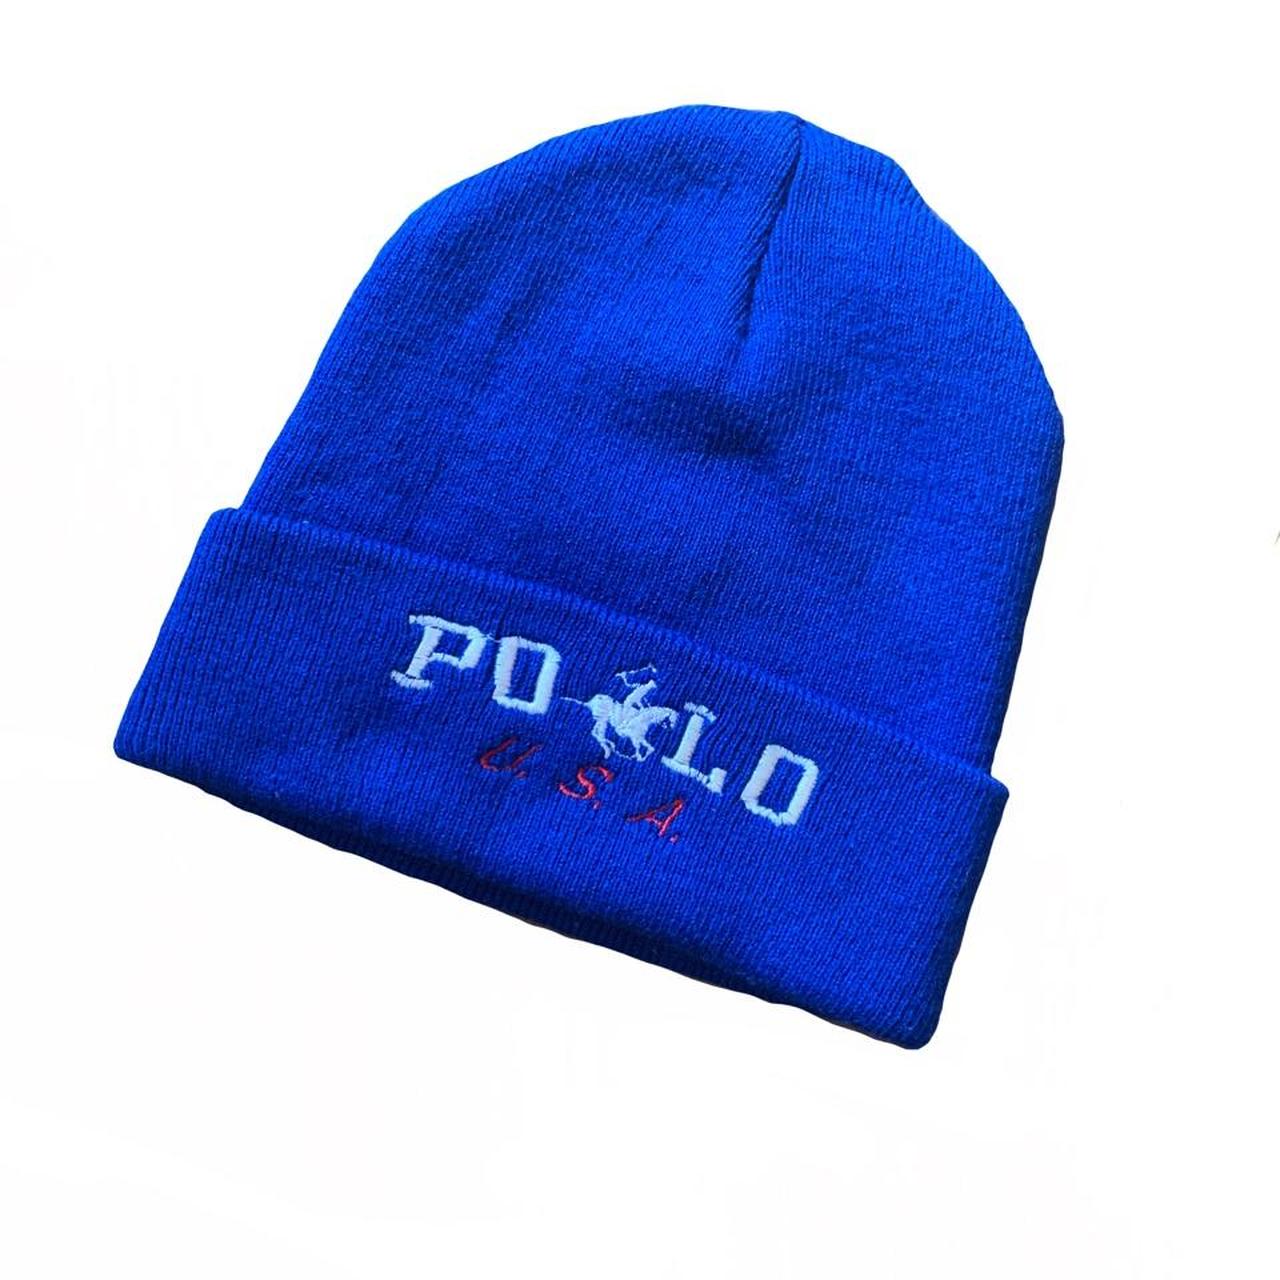 U.S. Polo Assn. Men's Blue and Red Hat